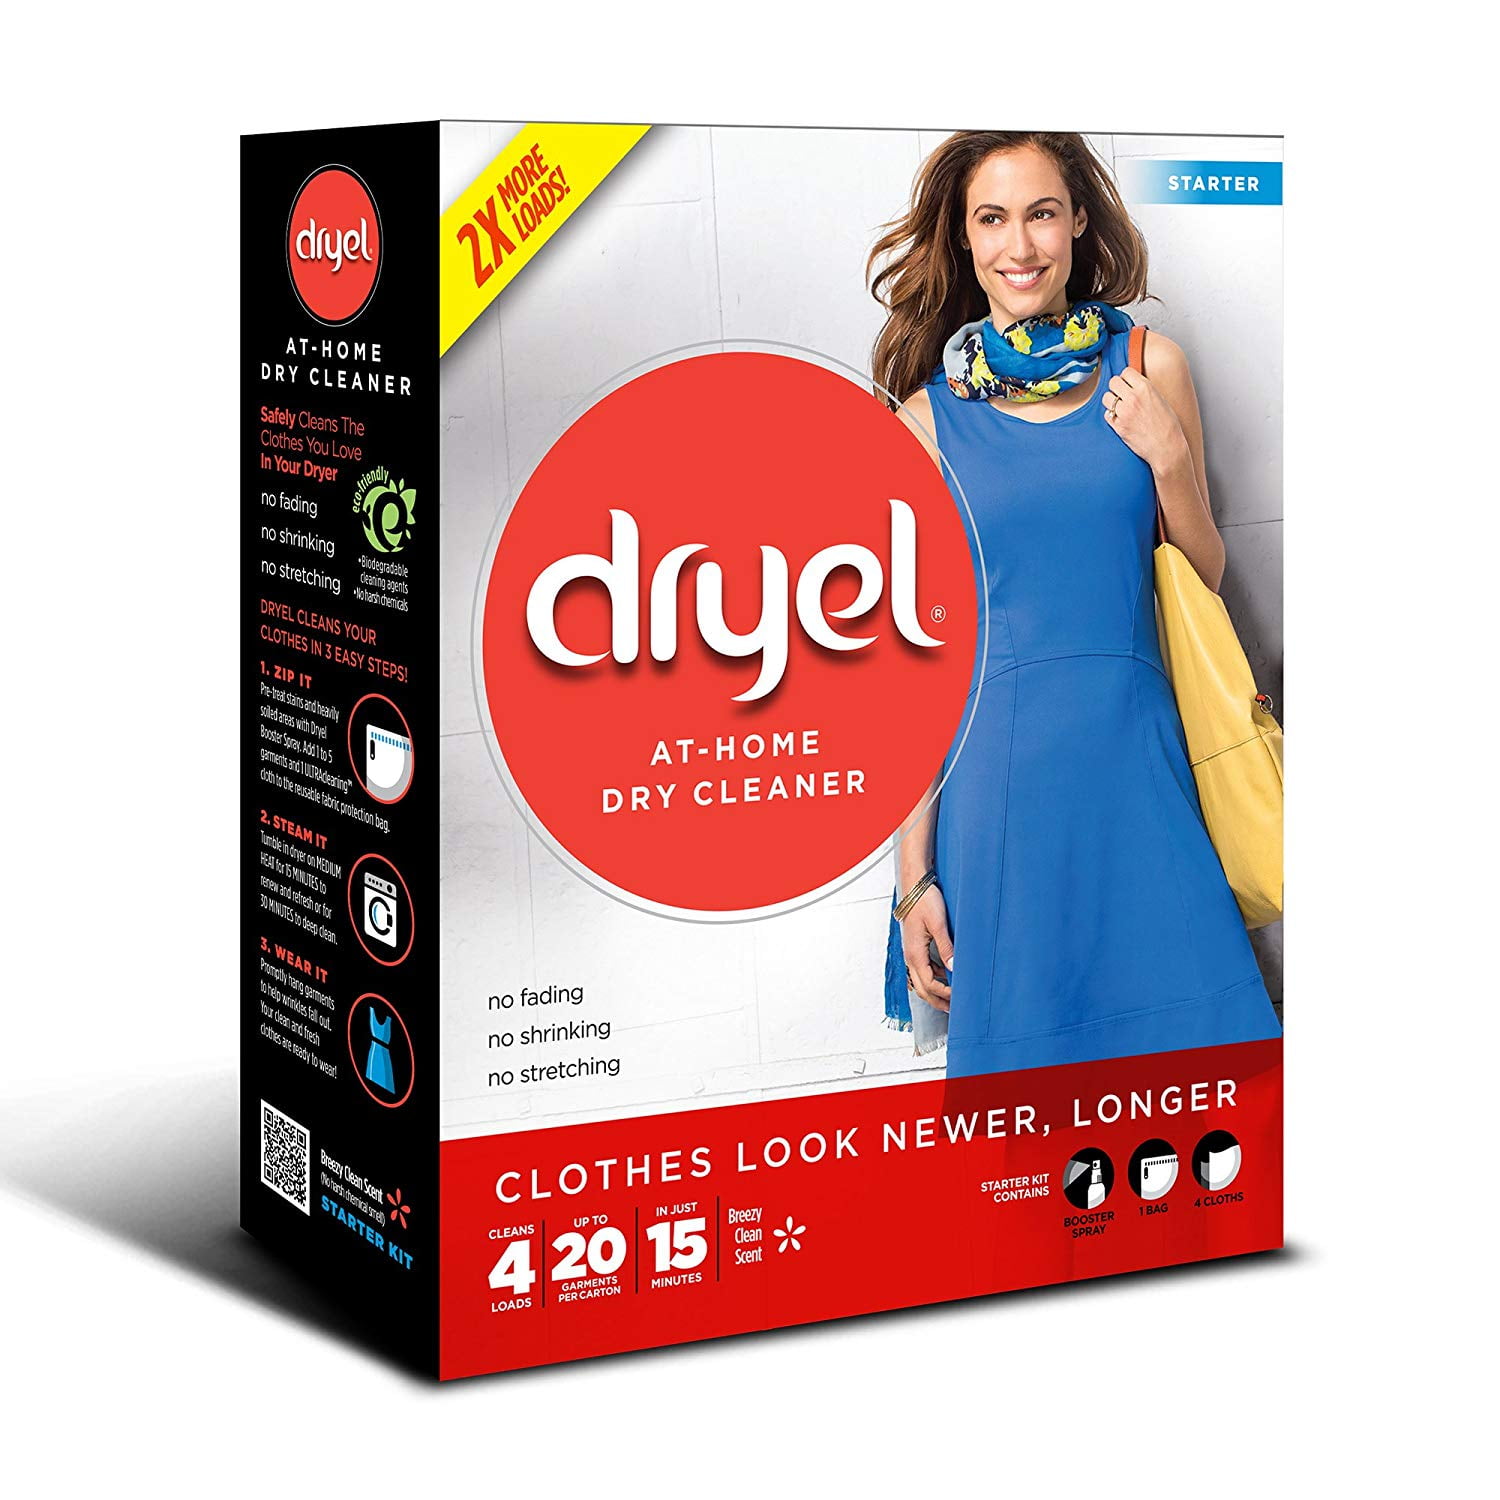 DRY CLEANER'S SECRET PACK OF 2 OR 6 CLOTHS SAVE MONEY ON DRY CLEANING 